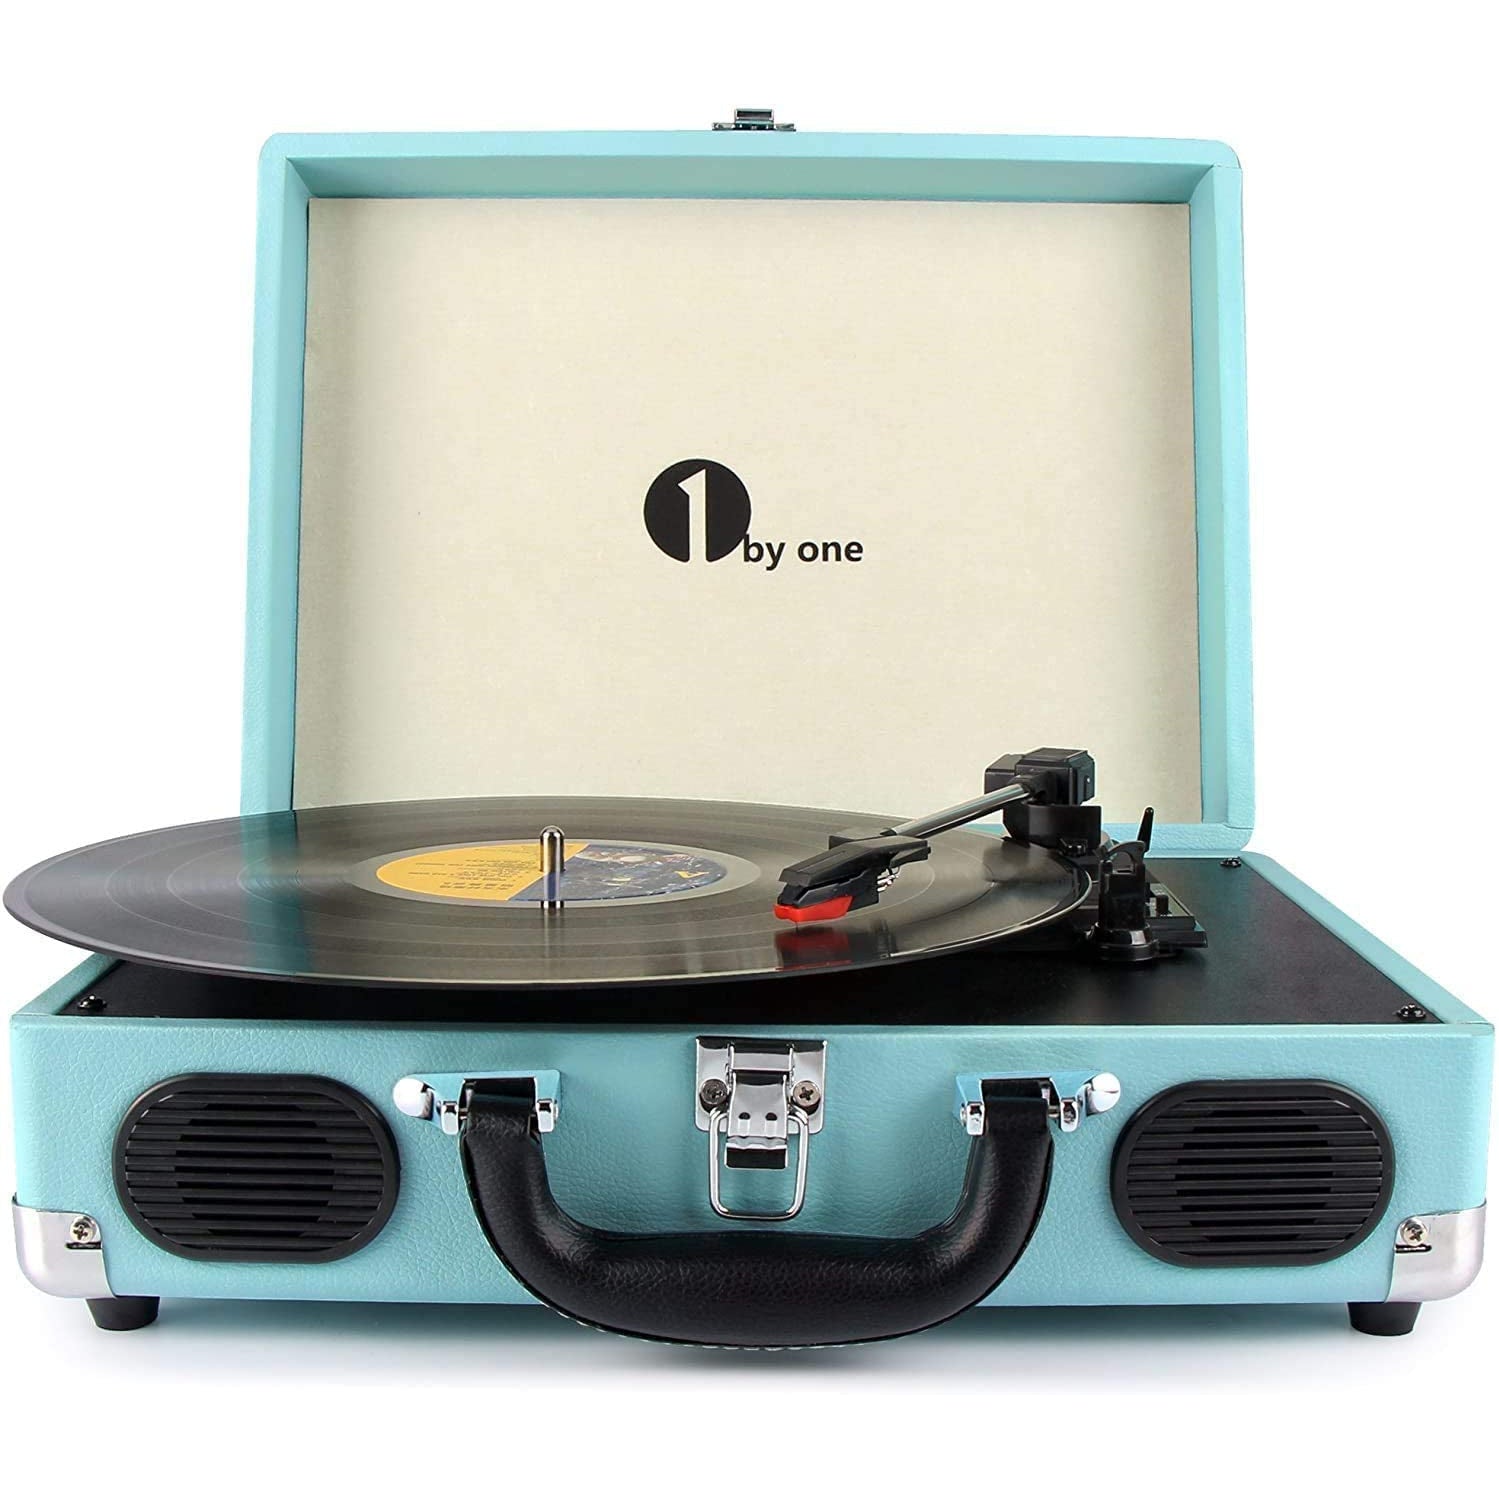 1 by One Vintage 3-Speed Turntable - Turquoise